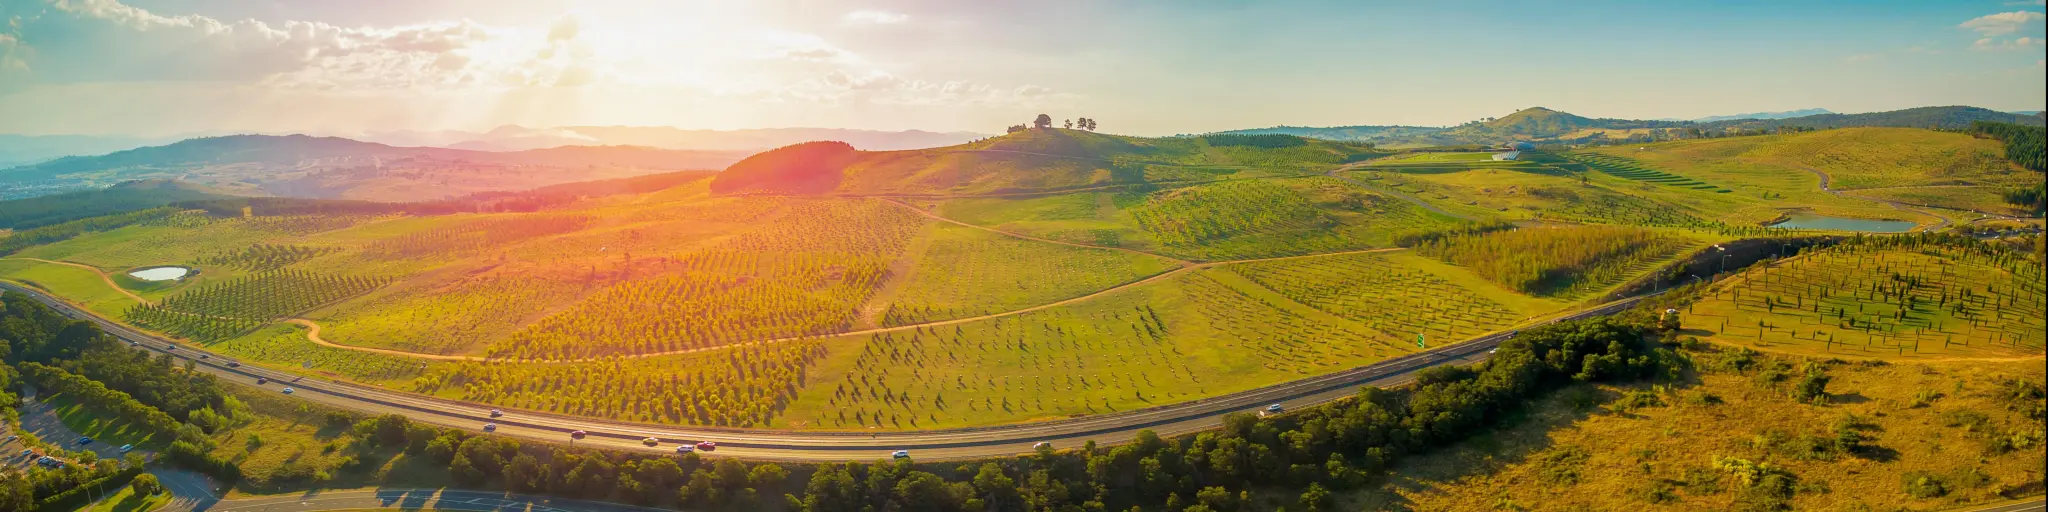 Aerial panorama of green fields and gently rolling hills - Tuggeranong Parkway and National Arboretum at sunset in Canberra, Australia